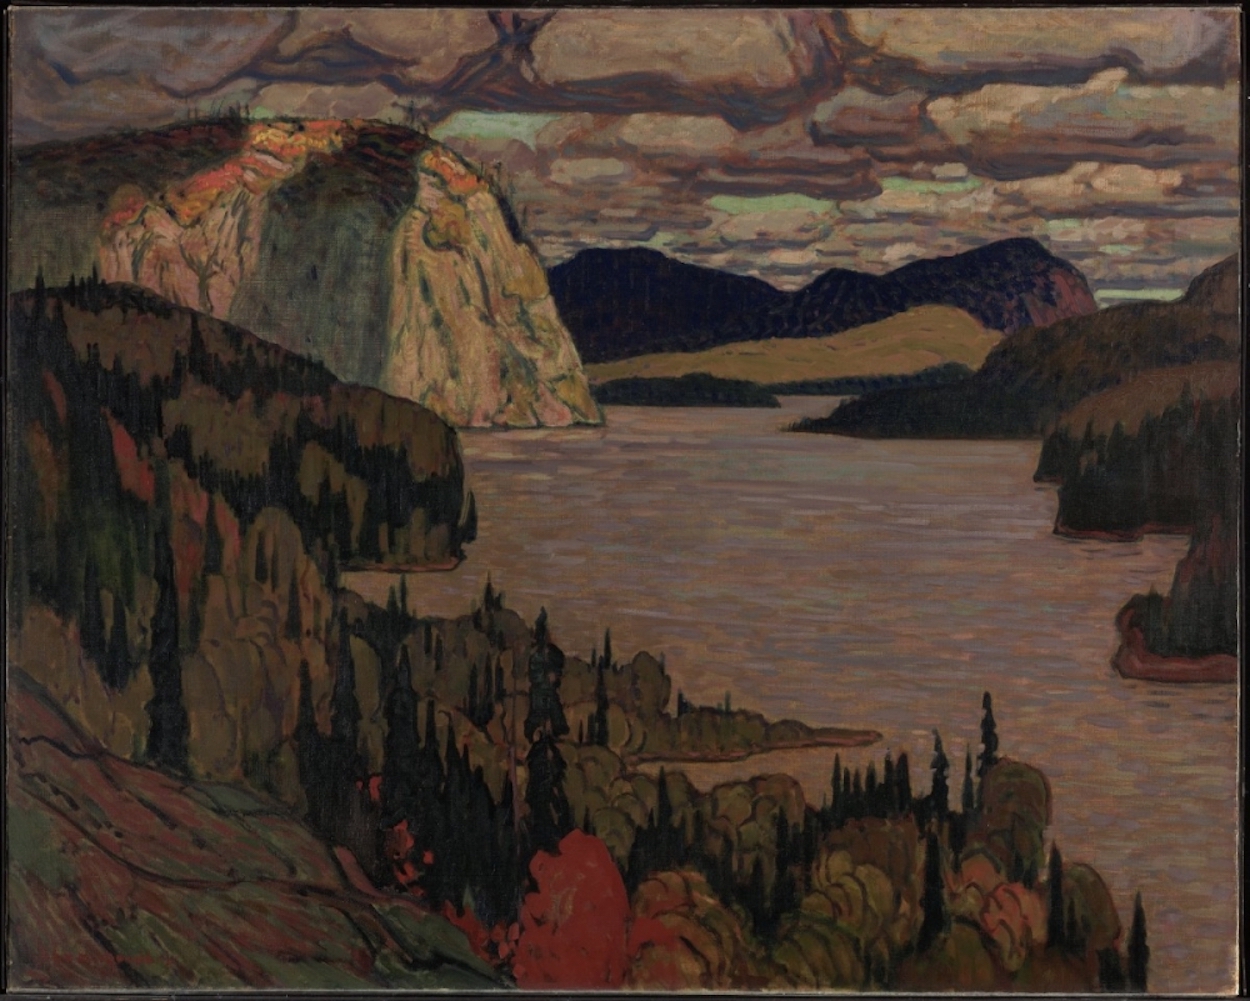 The Solemn Land by J.E.H. MacDonald - 1921 - 122.5 x 153.5 cm National Gallery of Canada